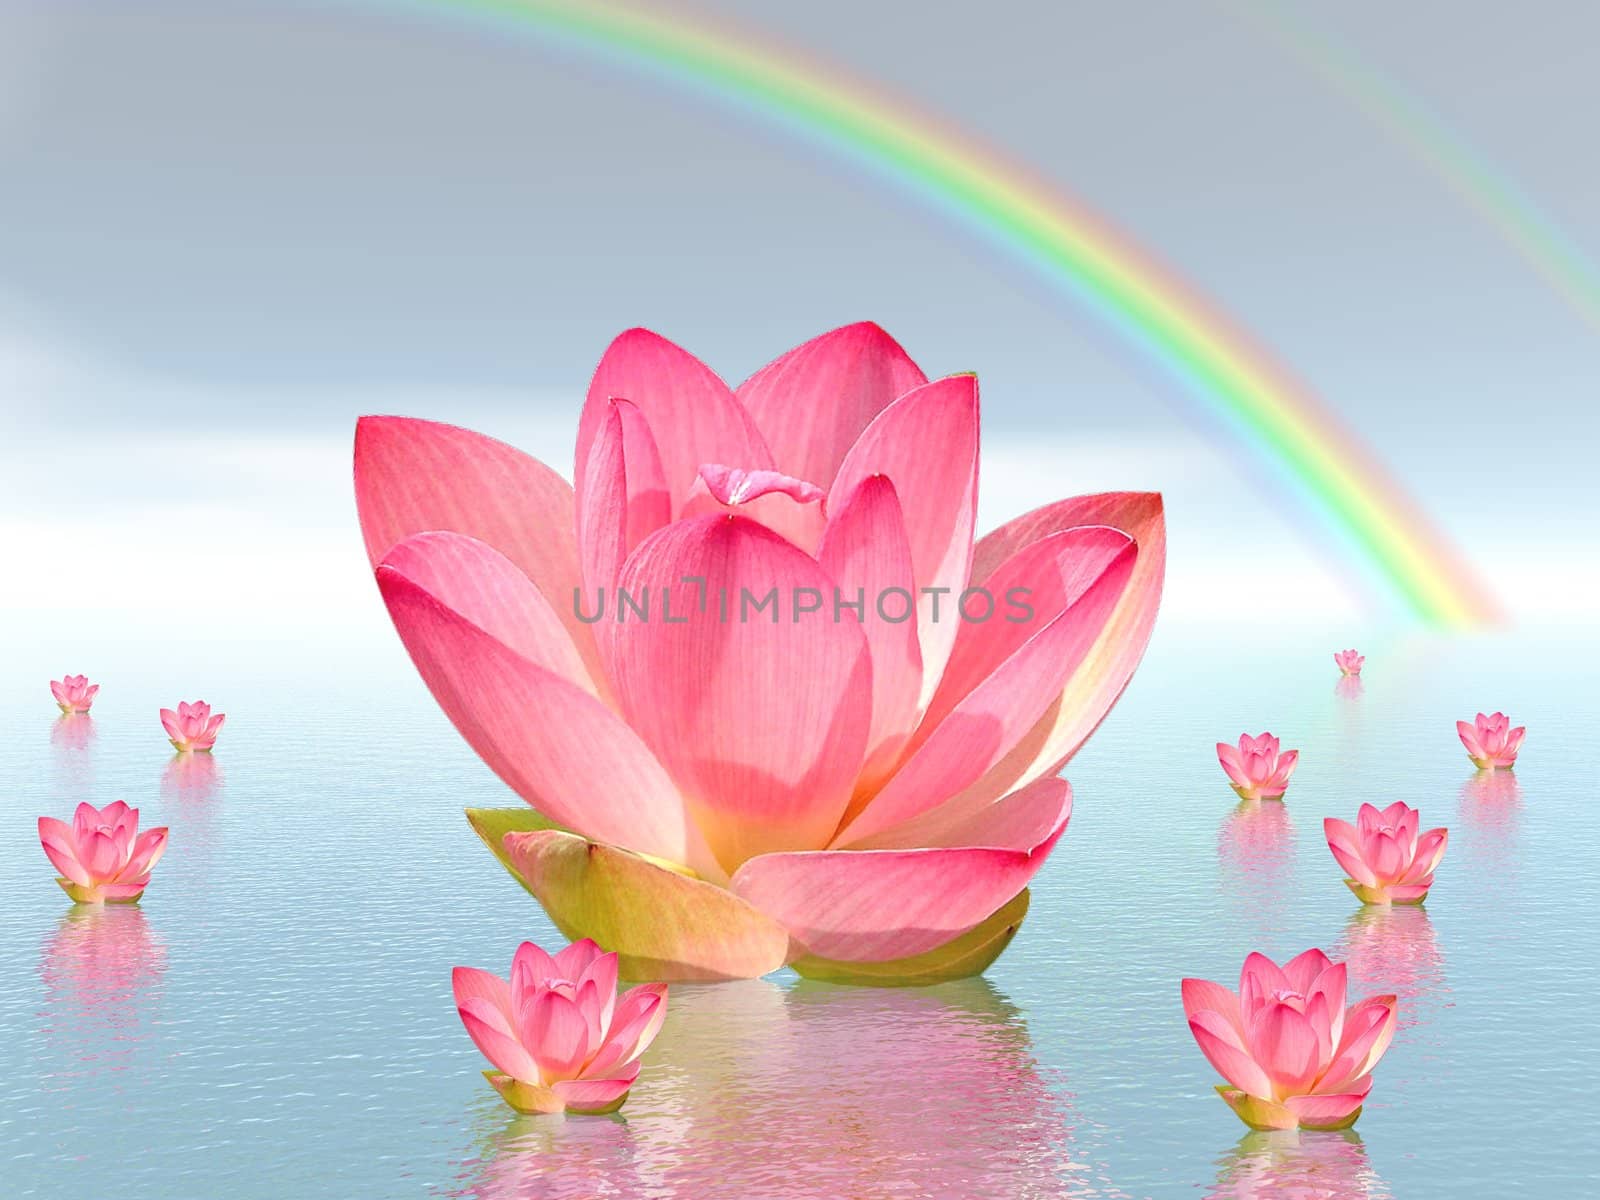 Pink lily flowers on water and under rainbow by beautiful weather